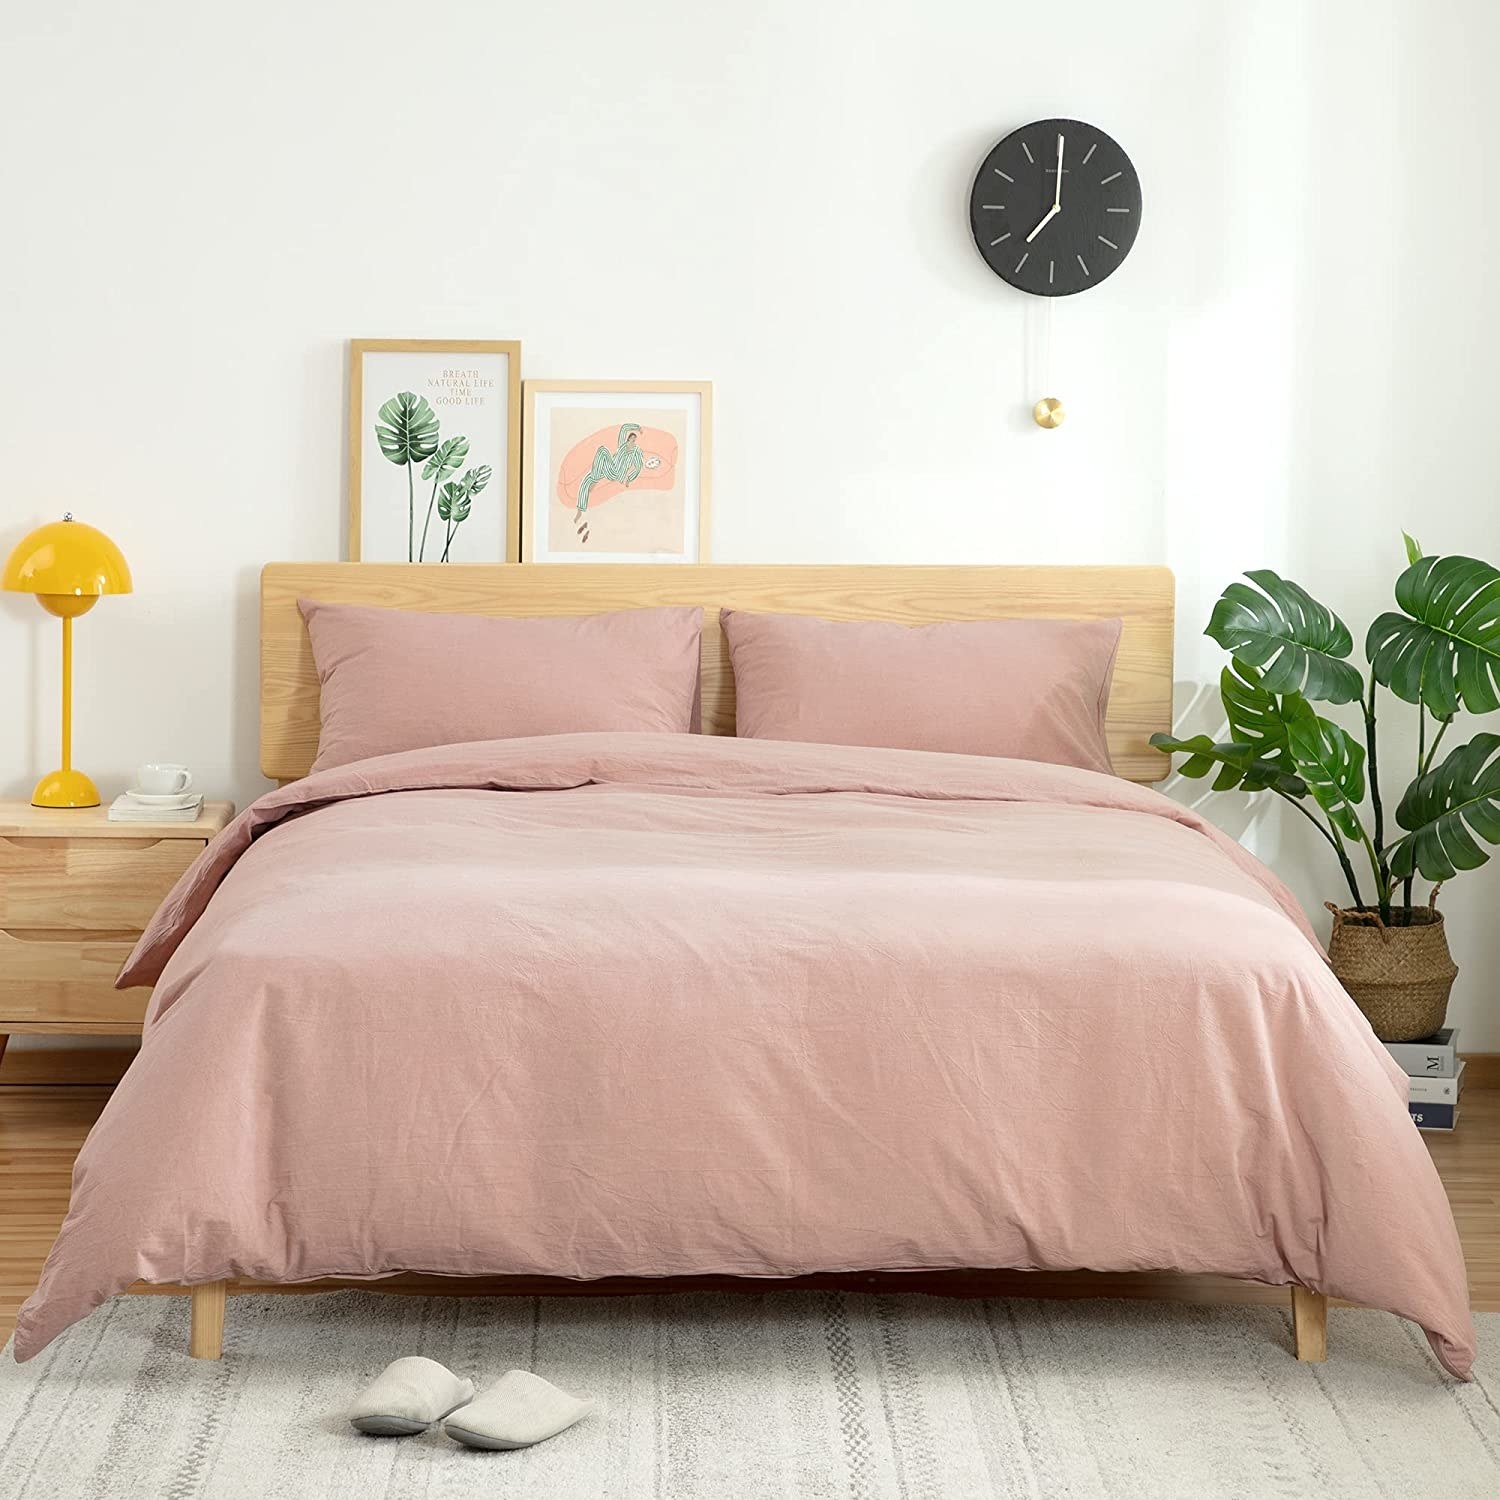 The duvet cover on a bed with a plant and nightstand on either side of it